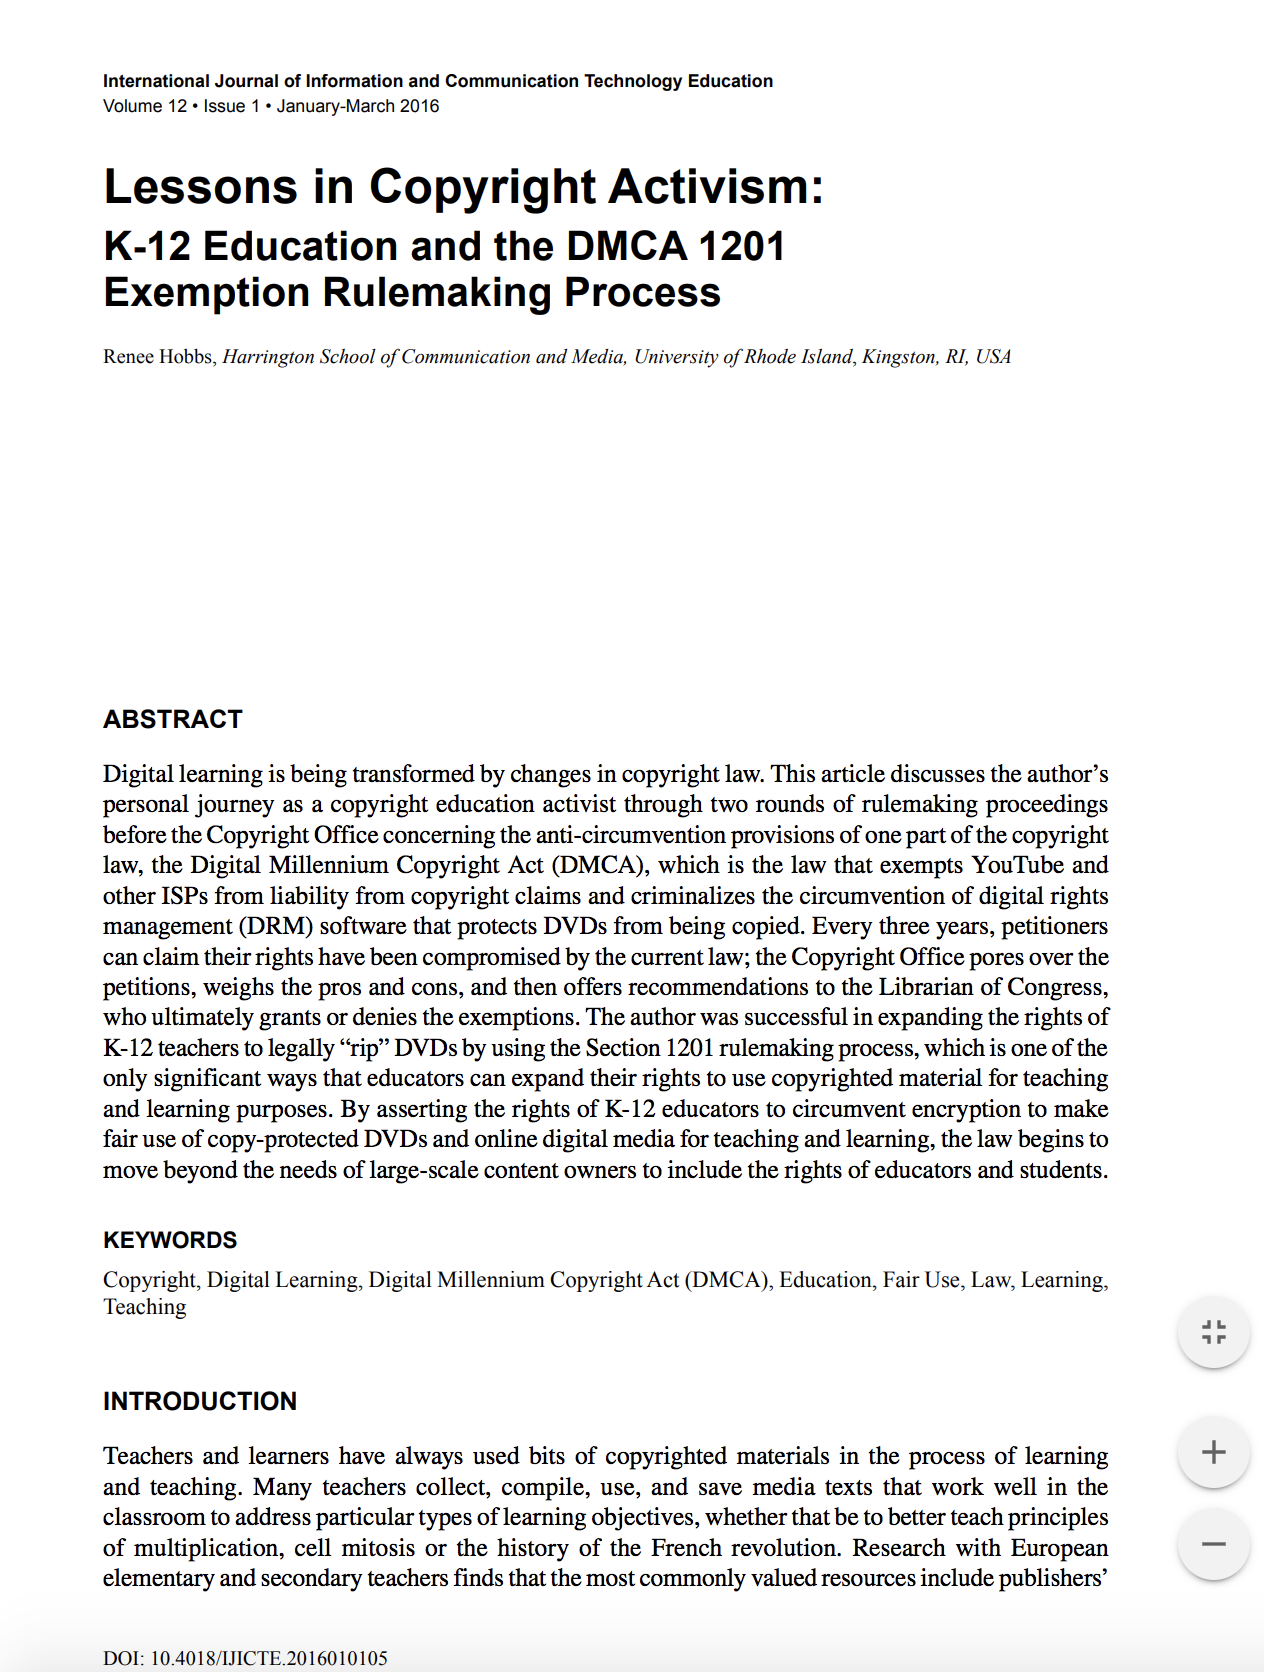 Lessons in copyright activism: K-12 education and the DMCA 1201 exemption rulemaking process.